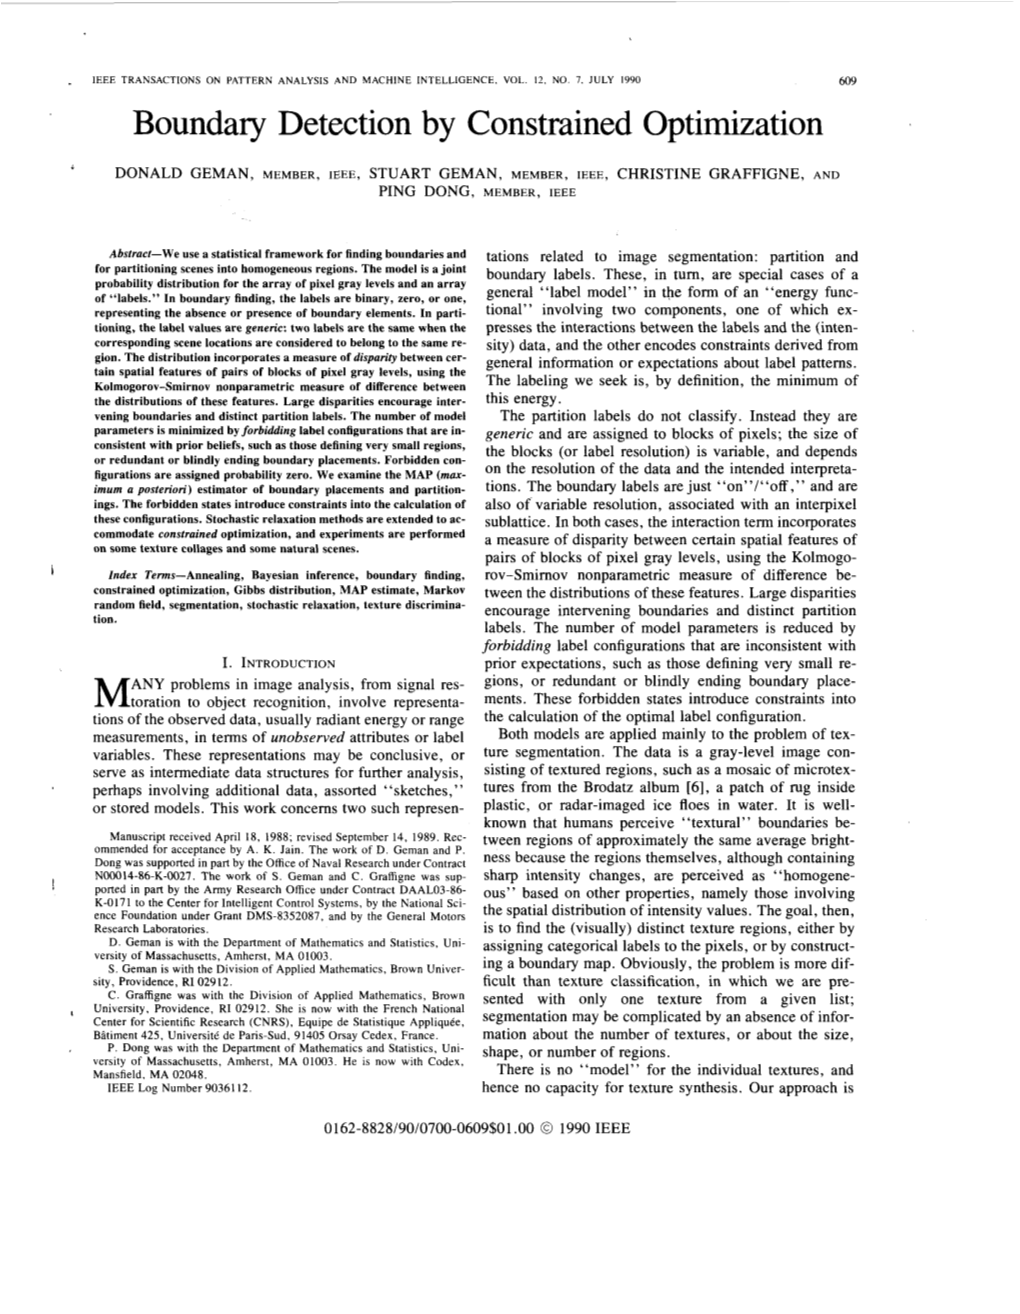 Boundary Detection by Constrained Optimization ‘ DONALD GEMAN, MEMBER, IEEE, STUART GEMAN, MEMBER, IEEE, CHRISTINE GRAFFIGNE, and PING DONG, MEMBER, IEEE